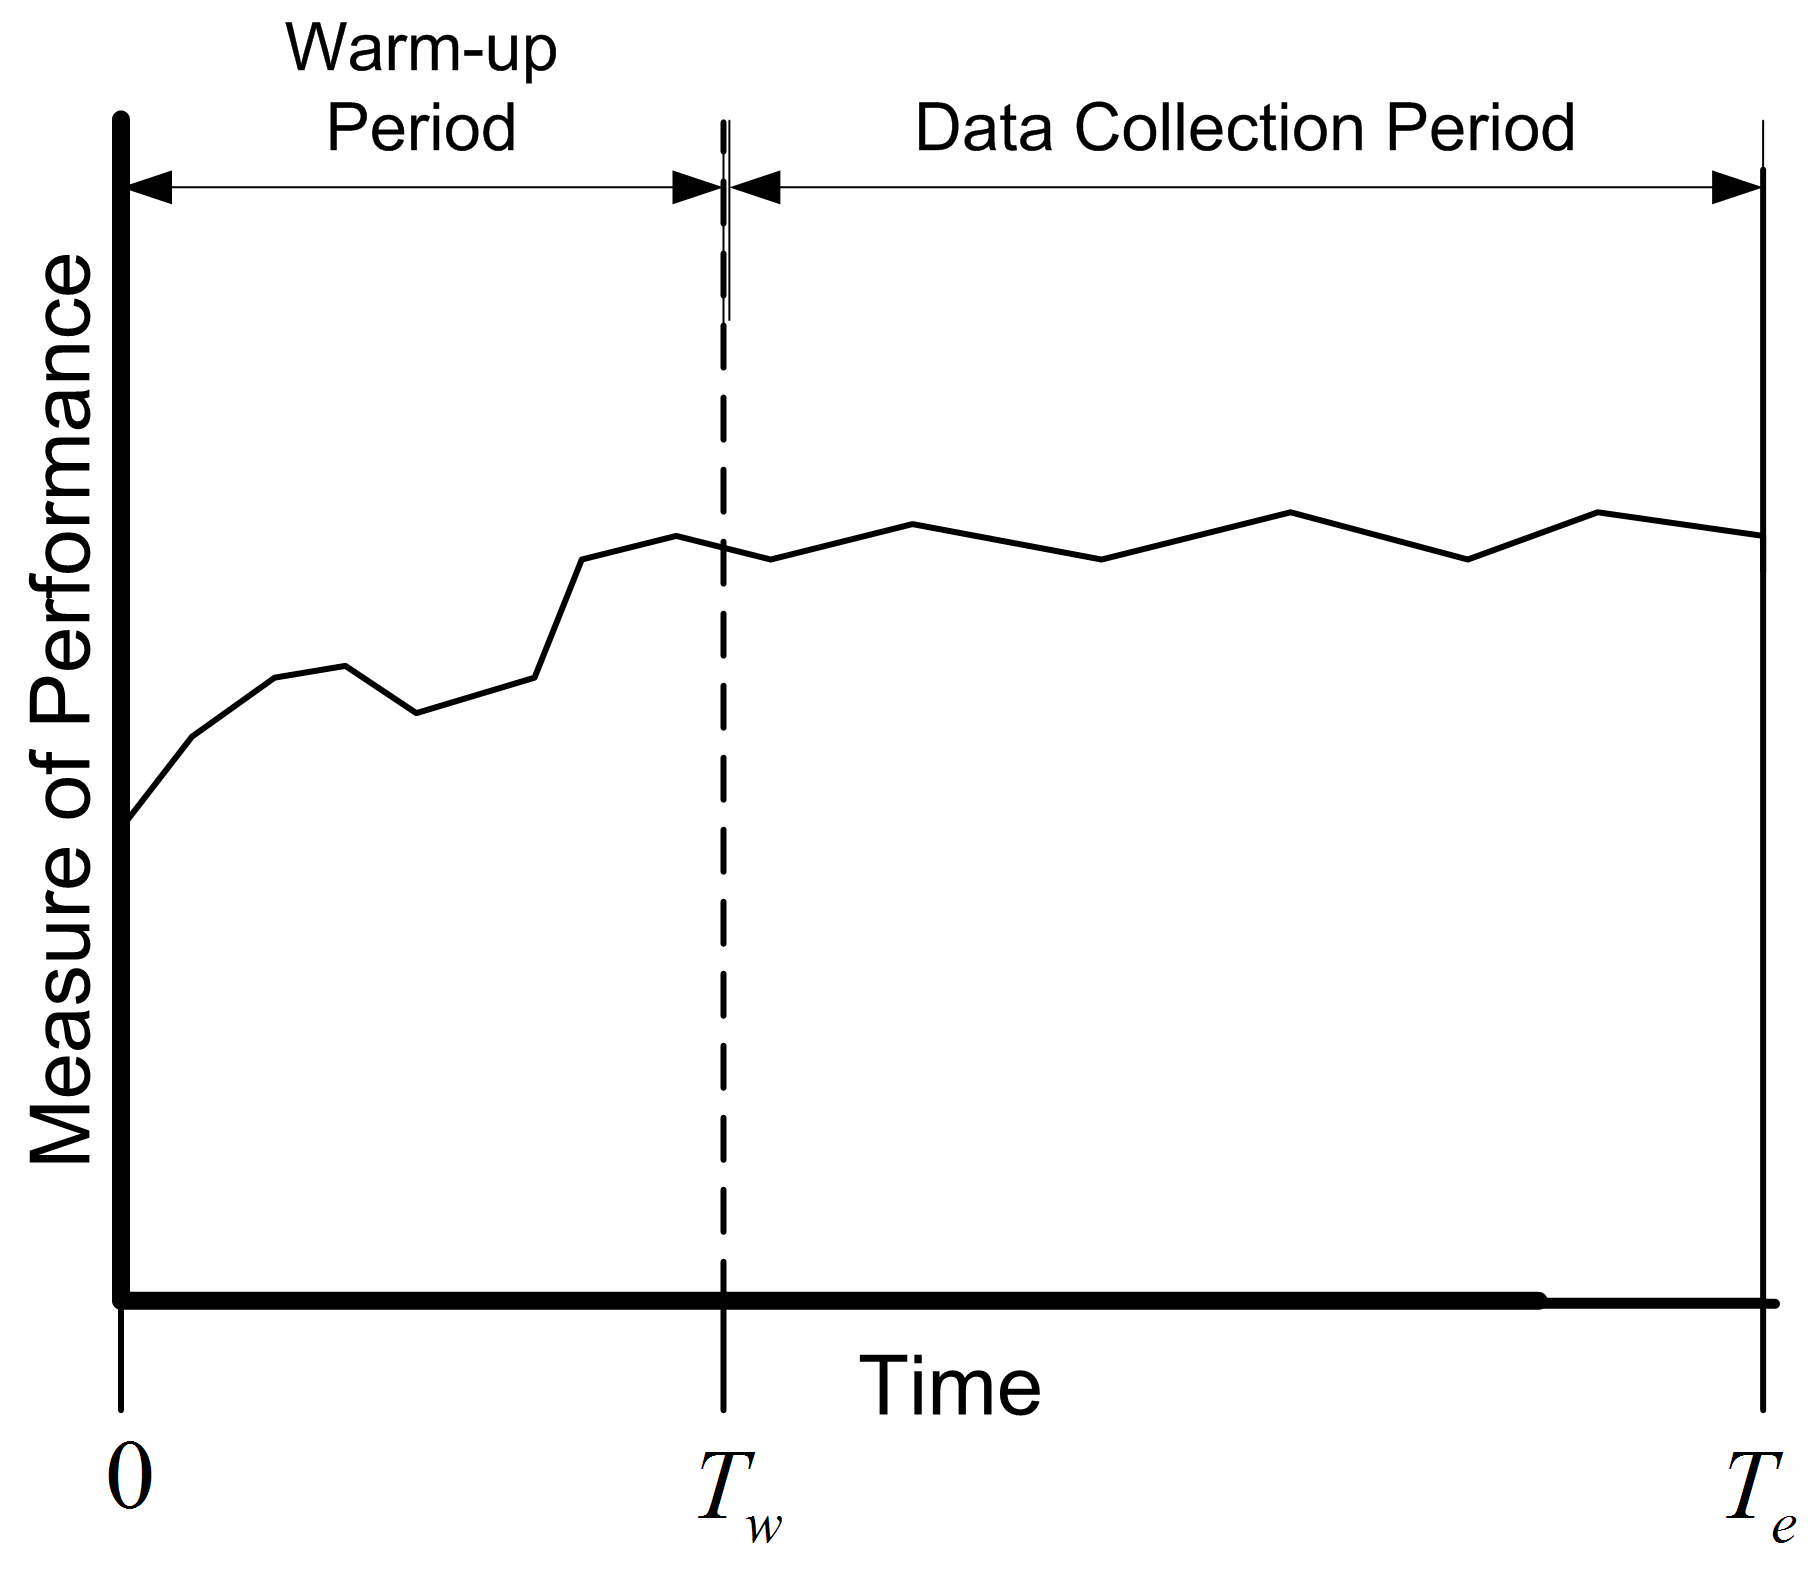 The concept of the warm up period